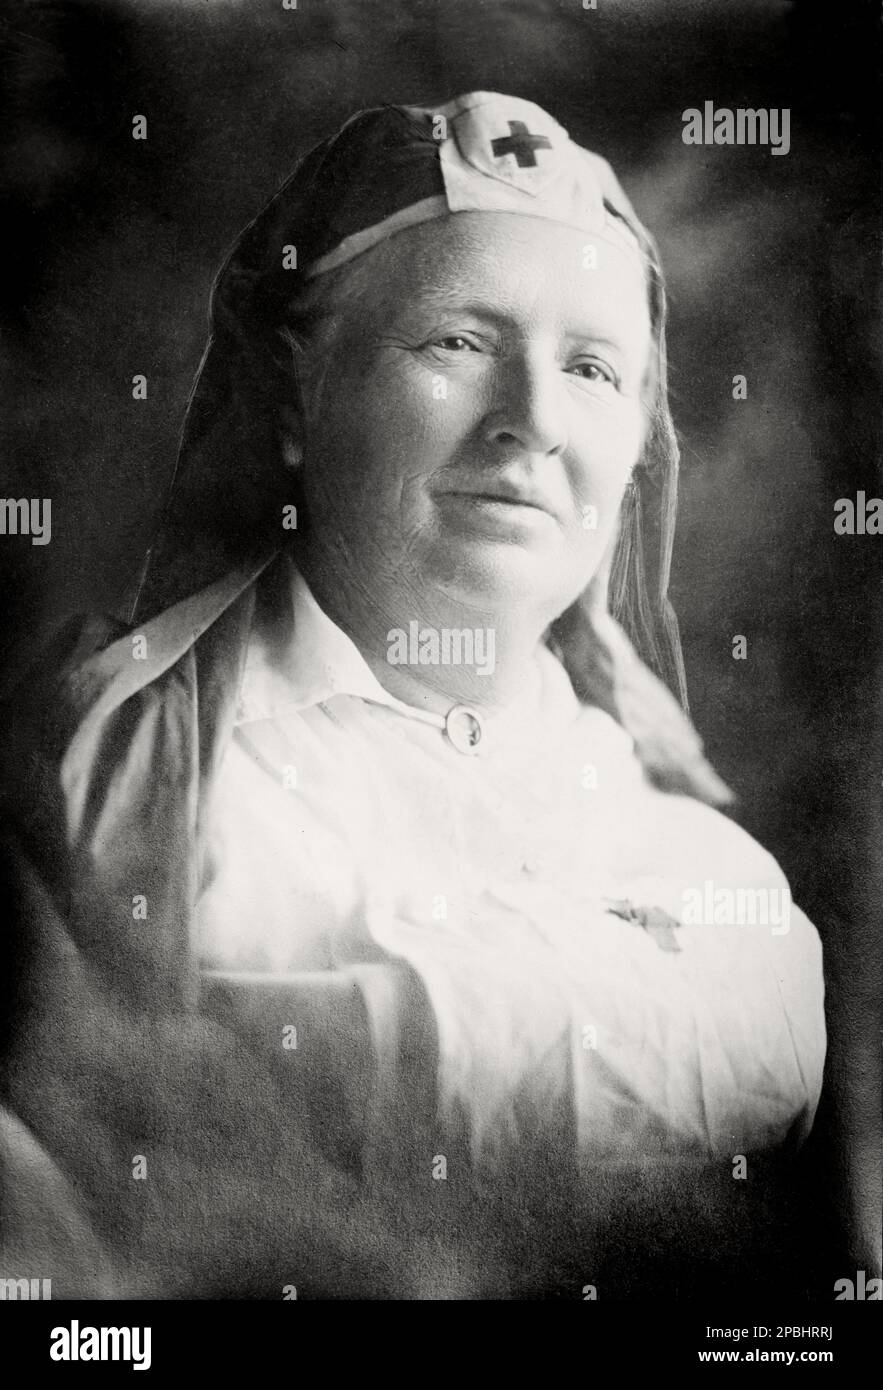 1920 , USA : Alice Mary Robertson ( 1854 – 1931 ) in Red Cross uniform , was an American educator, social worker, government official, and politician who became the second woman to serve in the United States Congress, and the first from the state of Oklahoma.  - foto storiche - foto storica   - portrait - ritratto  - PEDAGOGIA  - PEDAGOGO - Pedagoga - EDUCATORE - EDUCAZIONE - EDUCATRICE - donna anziana vecchia - old ancient woman - POLITICA - POLITICIAN - POLITIC - POLITICO DONNA  -  CROCE ROSSA - crocerossina  ----  Archivio GBB Stock Photo